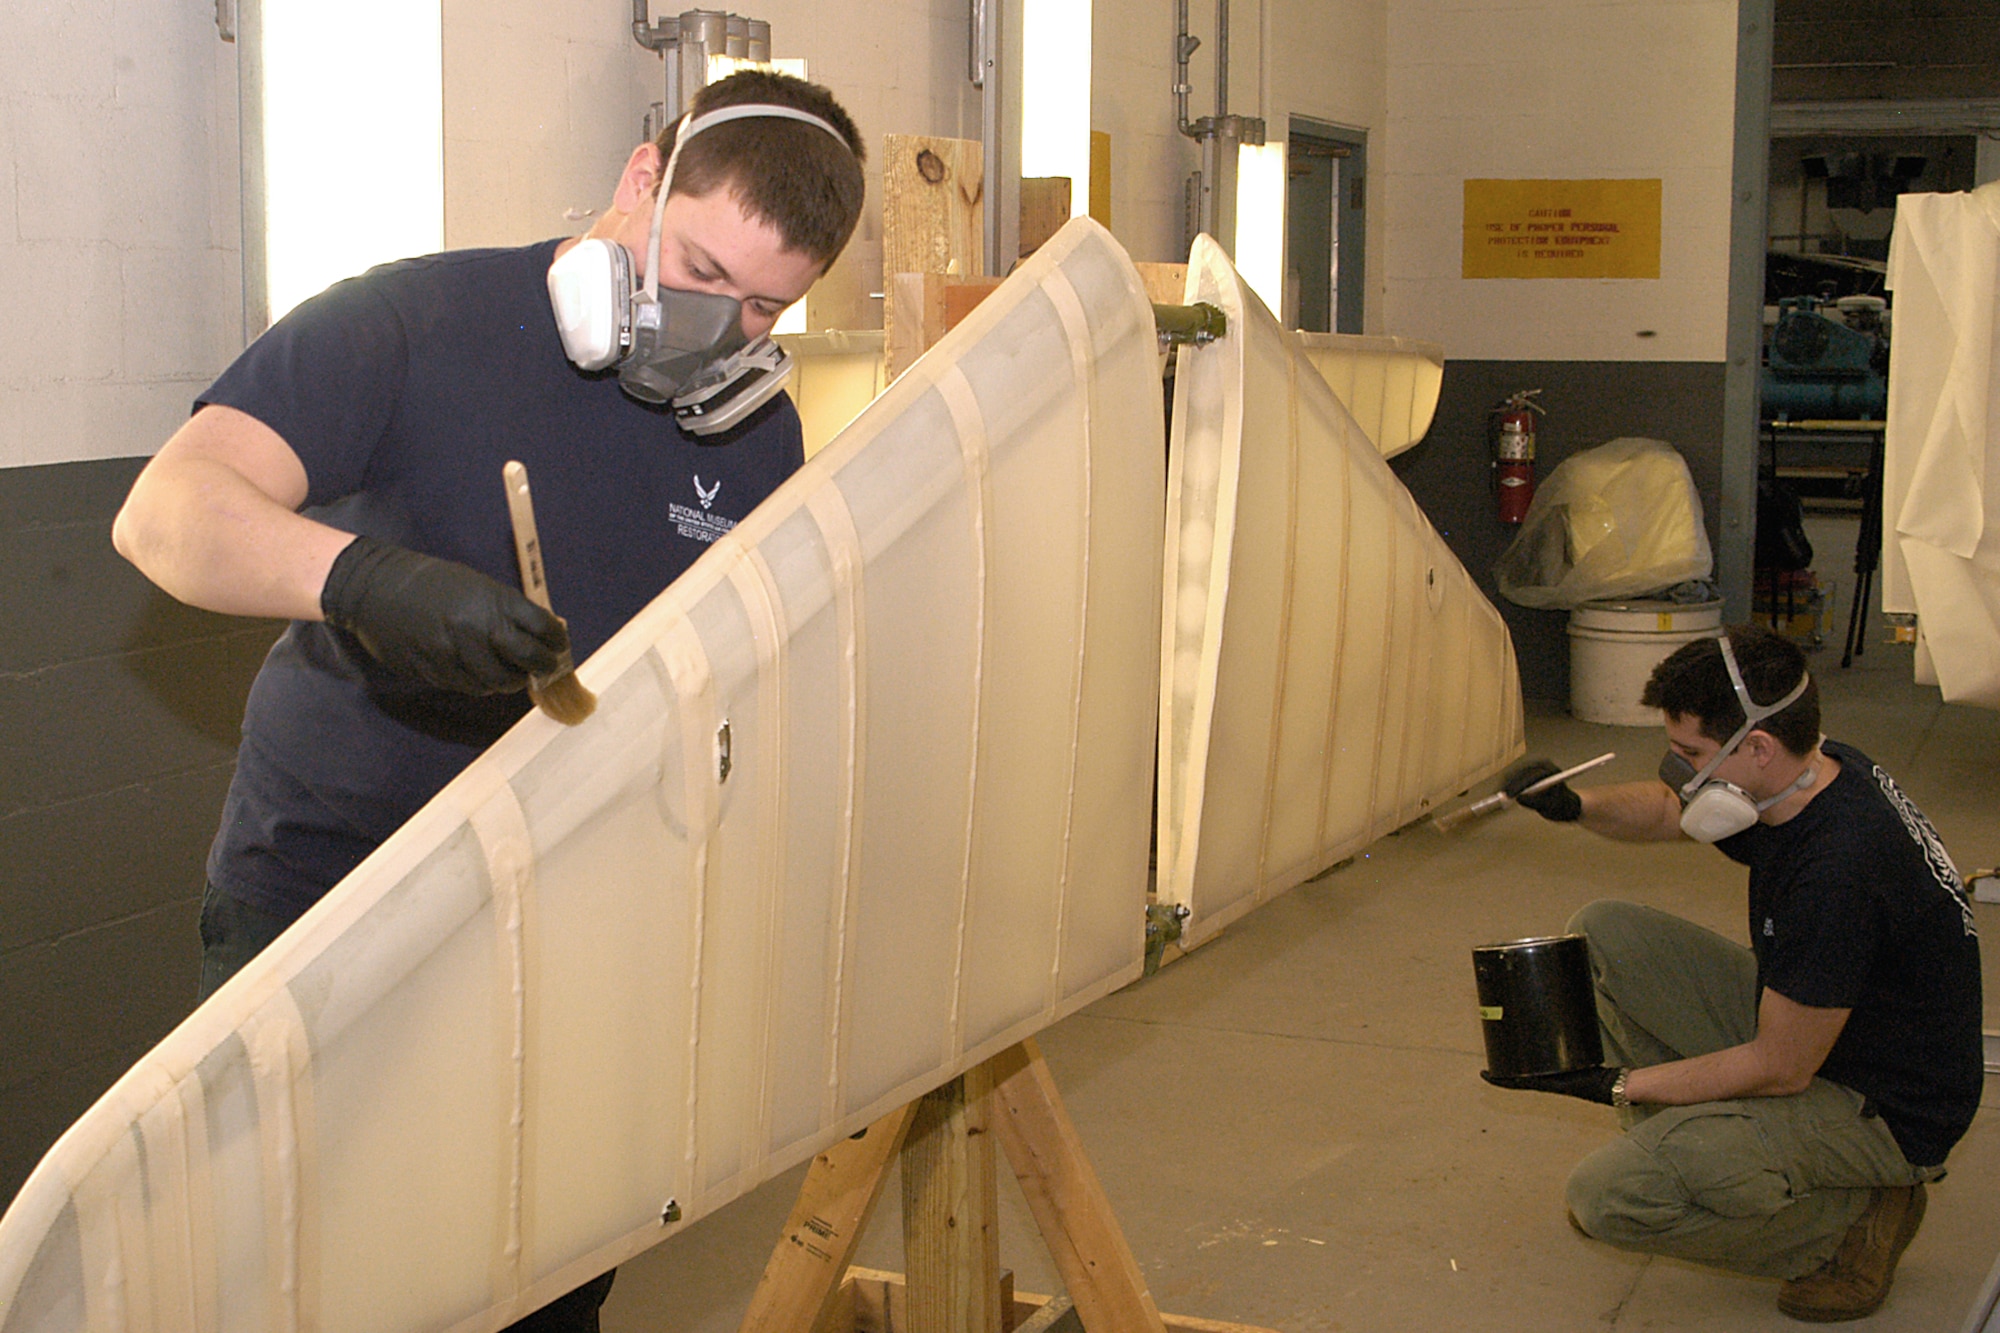 DAYTON, Ohio -- National Museum of the U.S. Air Force restoration specialists Nick Almeter and Casey Simmons apply aircraft dope which is a plasticized lacquer used to tighten and stiffen the fabric that is stretched over the airframe.  This procedure helps to weatherproof the aircraft and make the cotton airtight. Plans call for the aircraft to be part of an expanded Tuskegee Airman exhibit in the World War II Gallery at the National Museum of the U.S. Air Force. (U.S. Air Force photo by Ken LaRock)